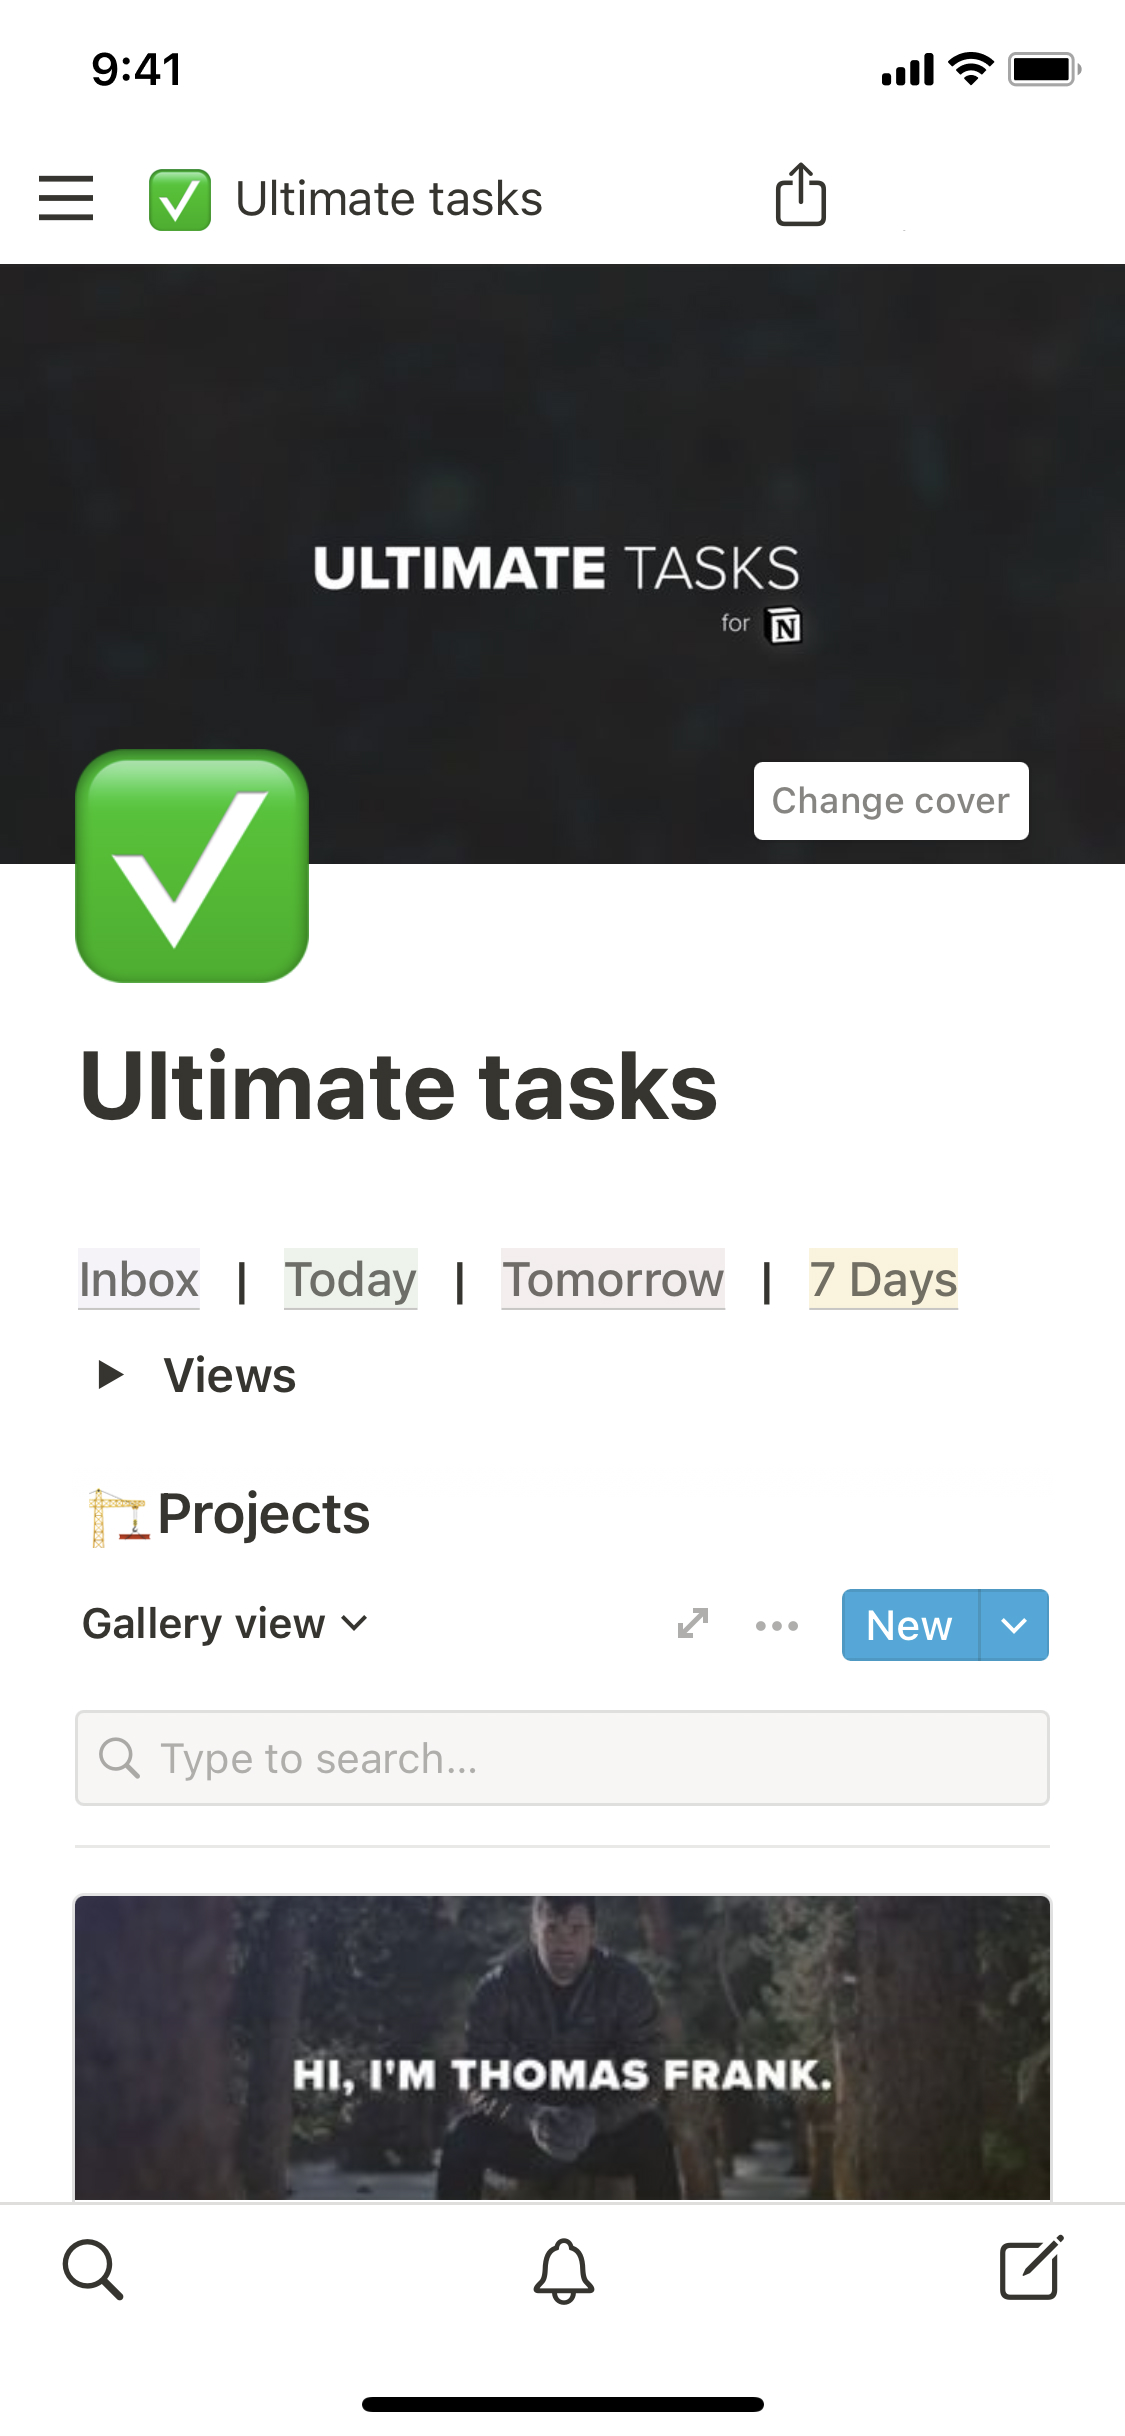 The mobile image for the Ultimate Tasks template